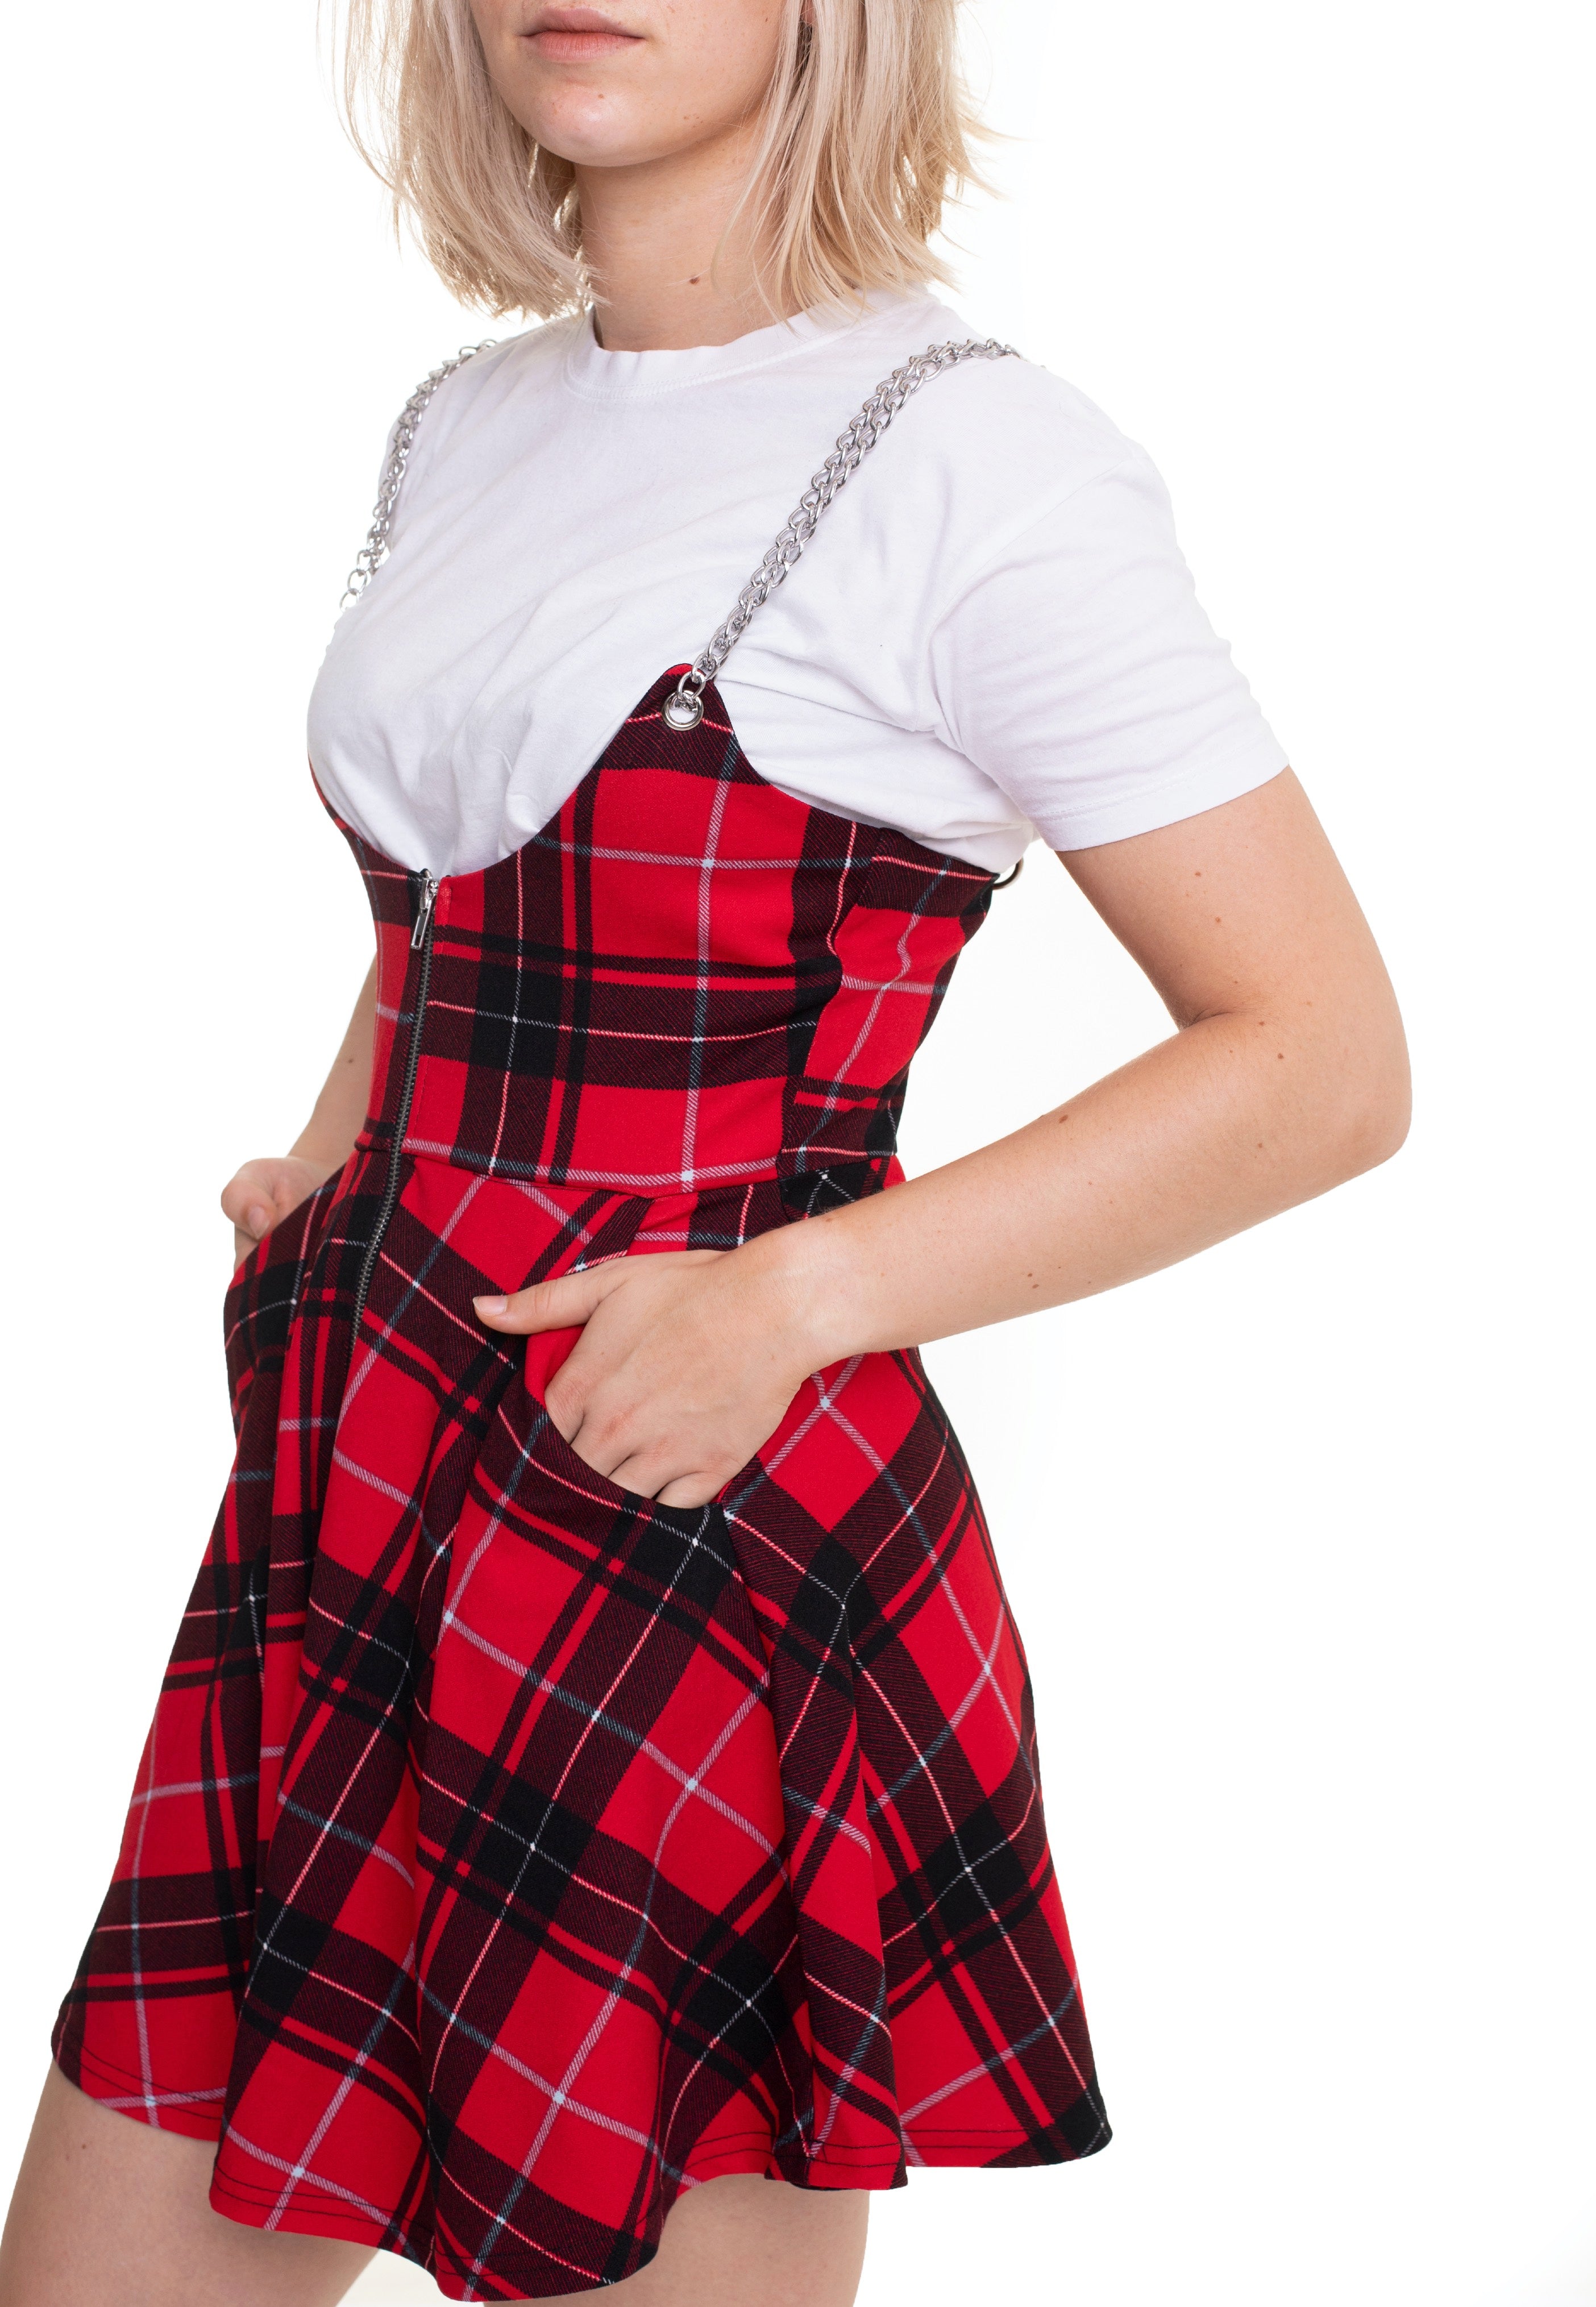 Jawbreaker - High Waisted With Chain Straps Red - Skirt